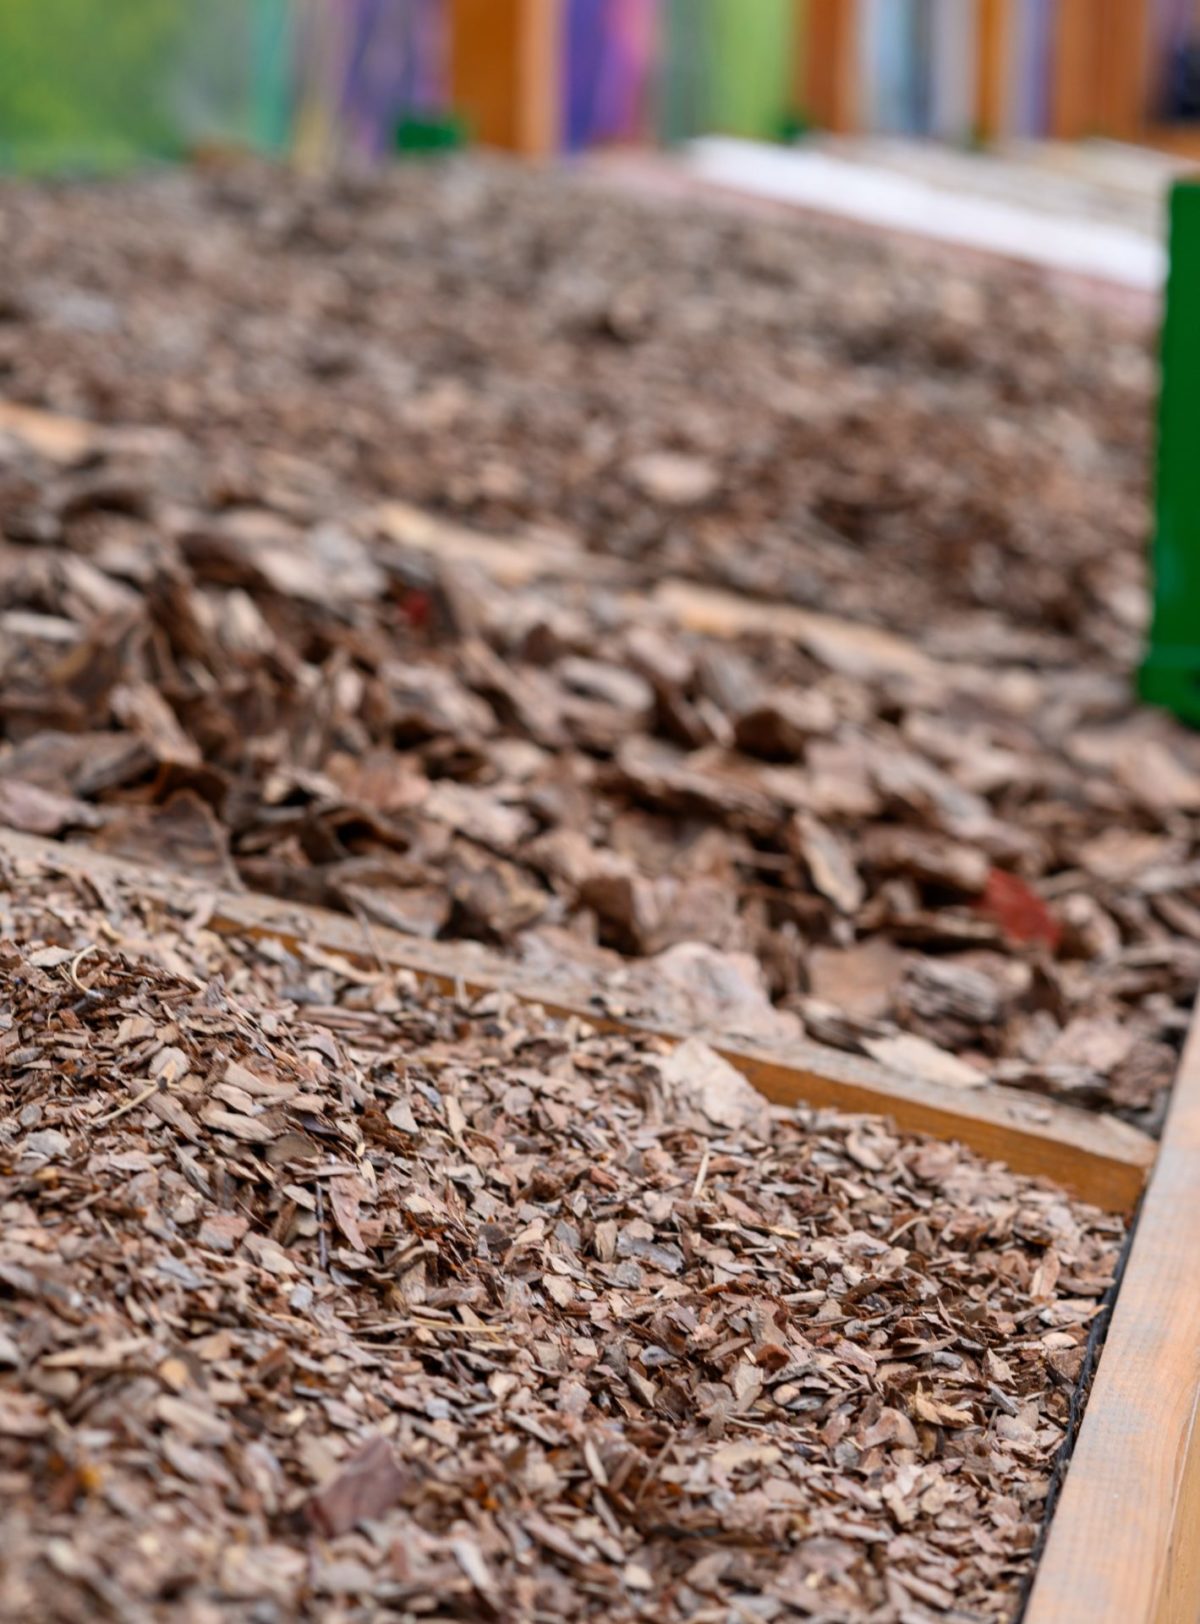 Five Advantages of Mulching Your Trees and Shrubs Through the Winter Monthsfeatured image